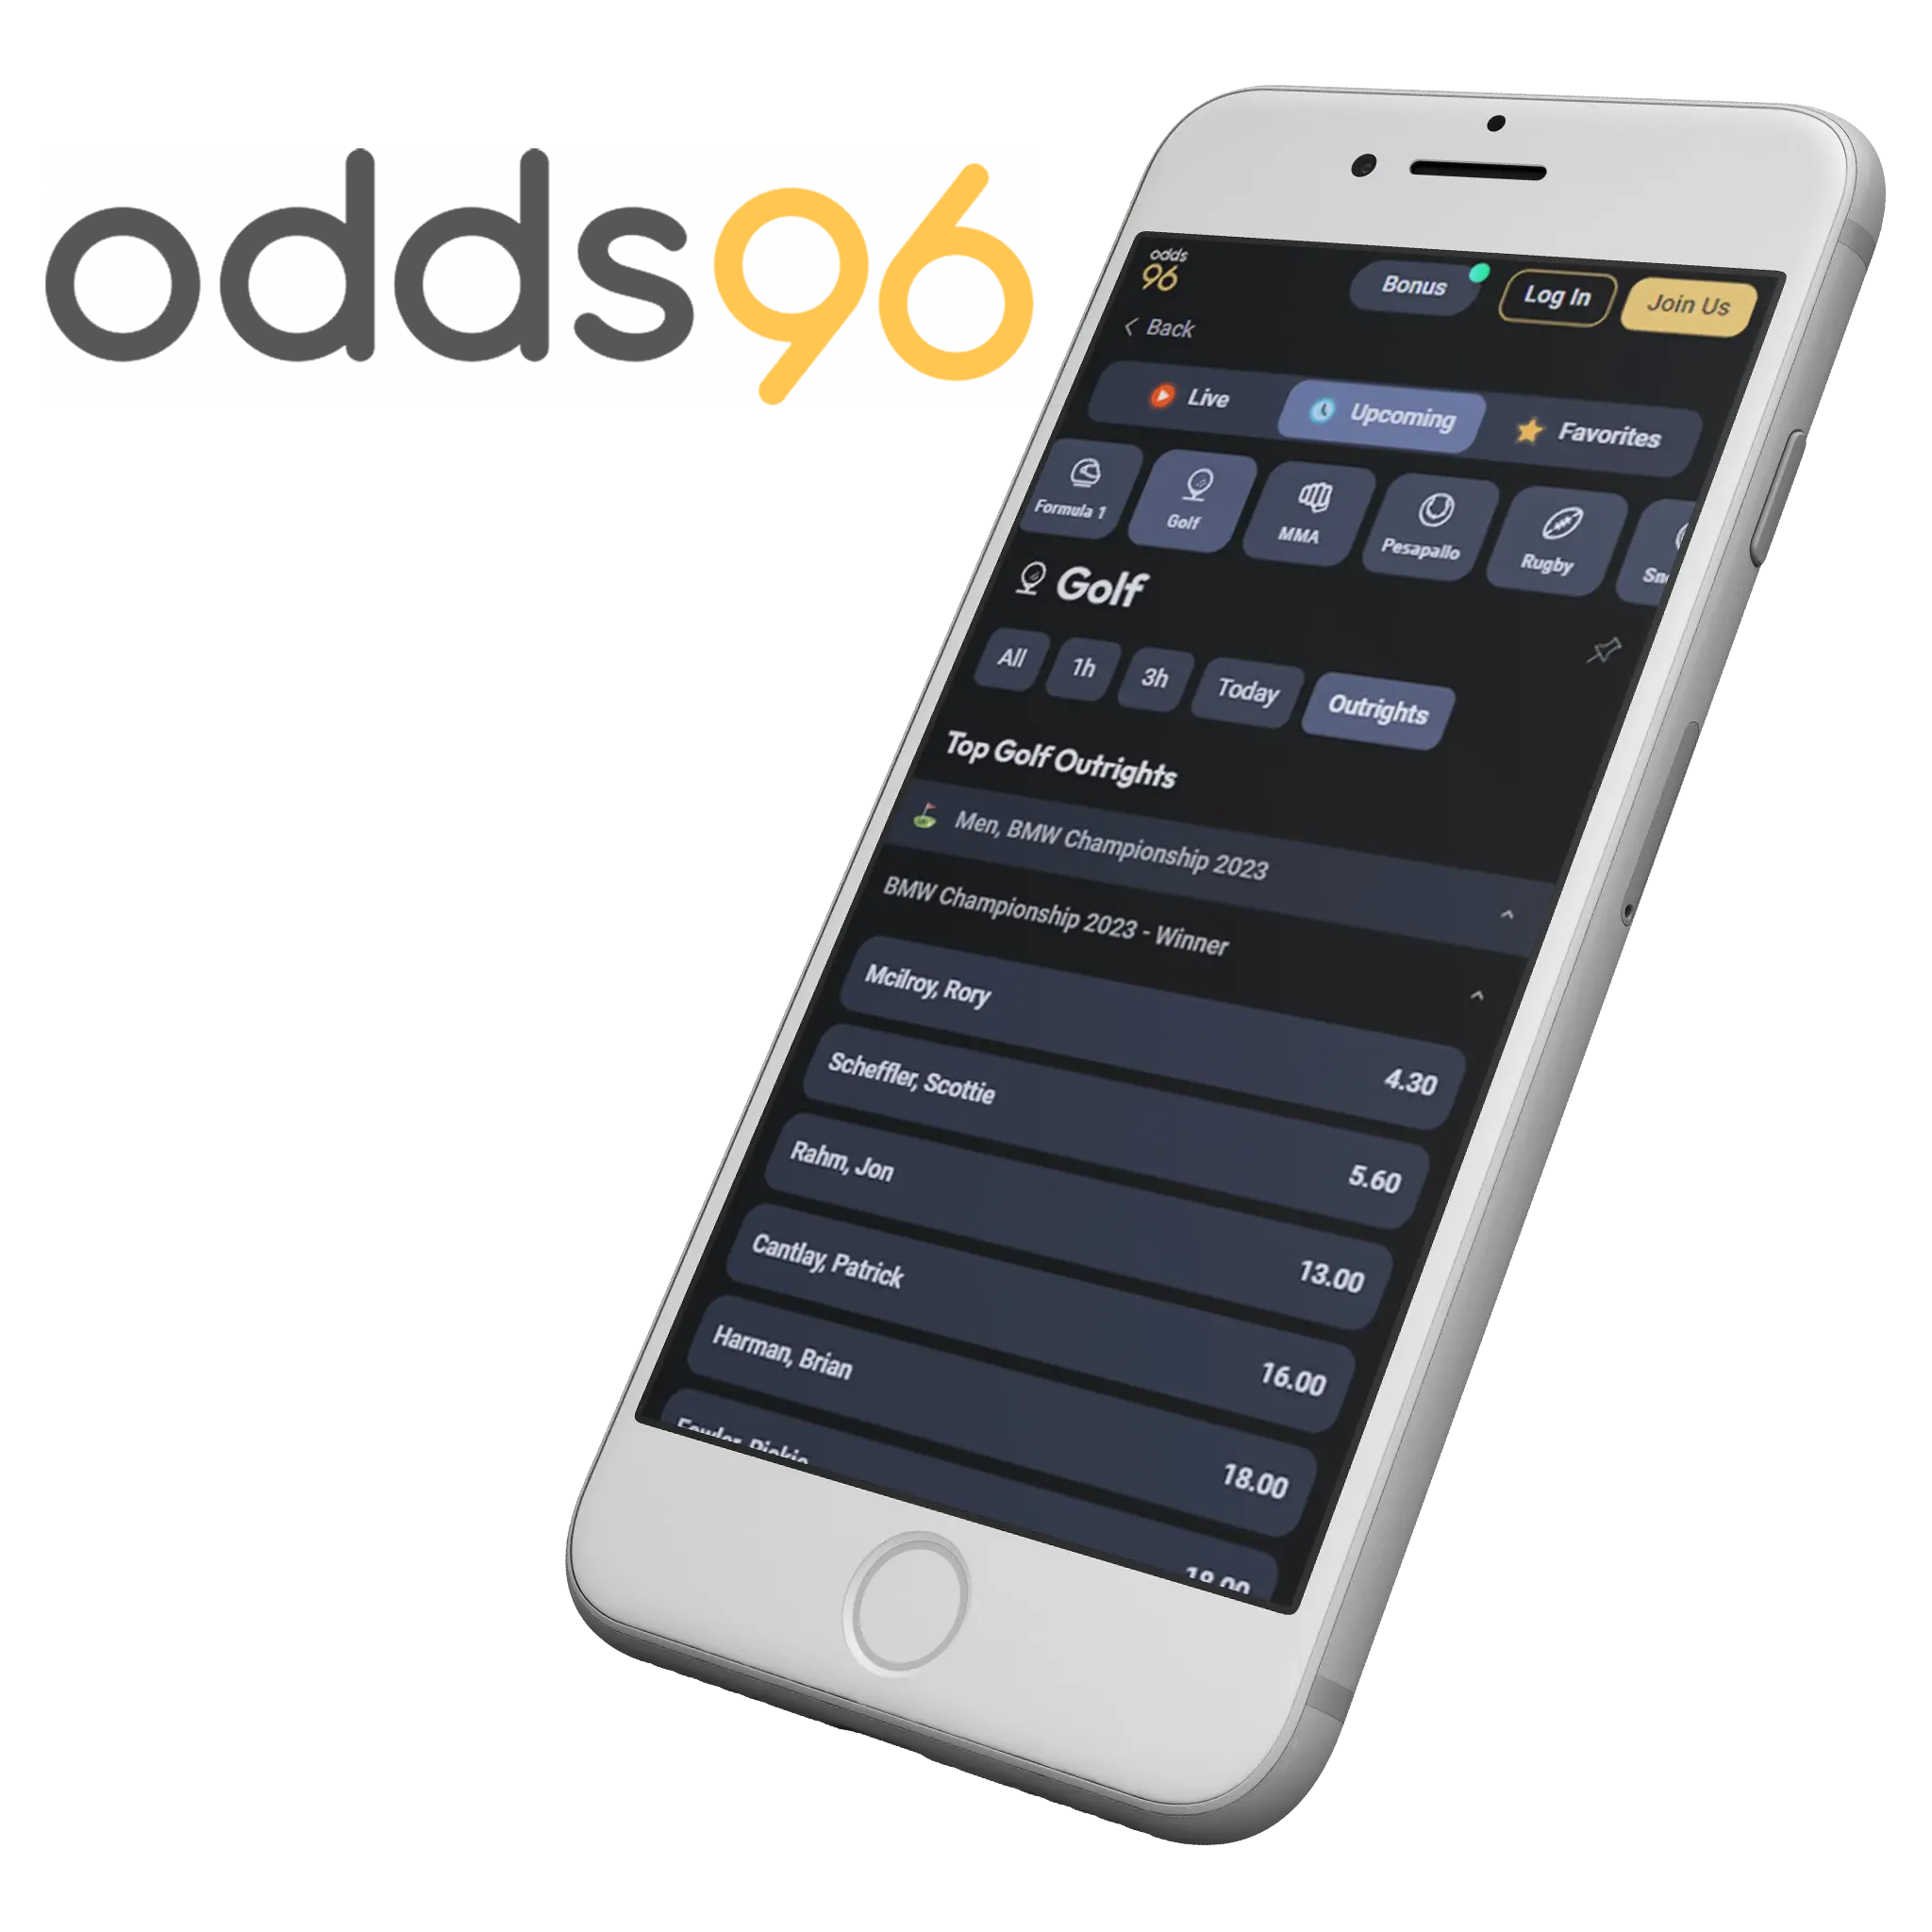 You may start a spectacular online golf betting journey by downloading the incredible Odds96 app.